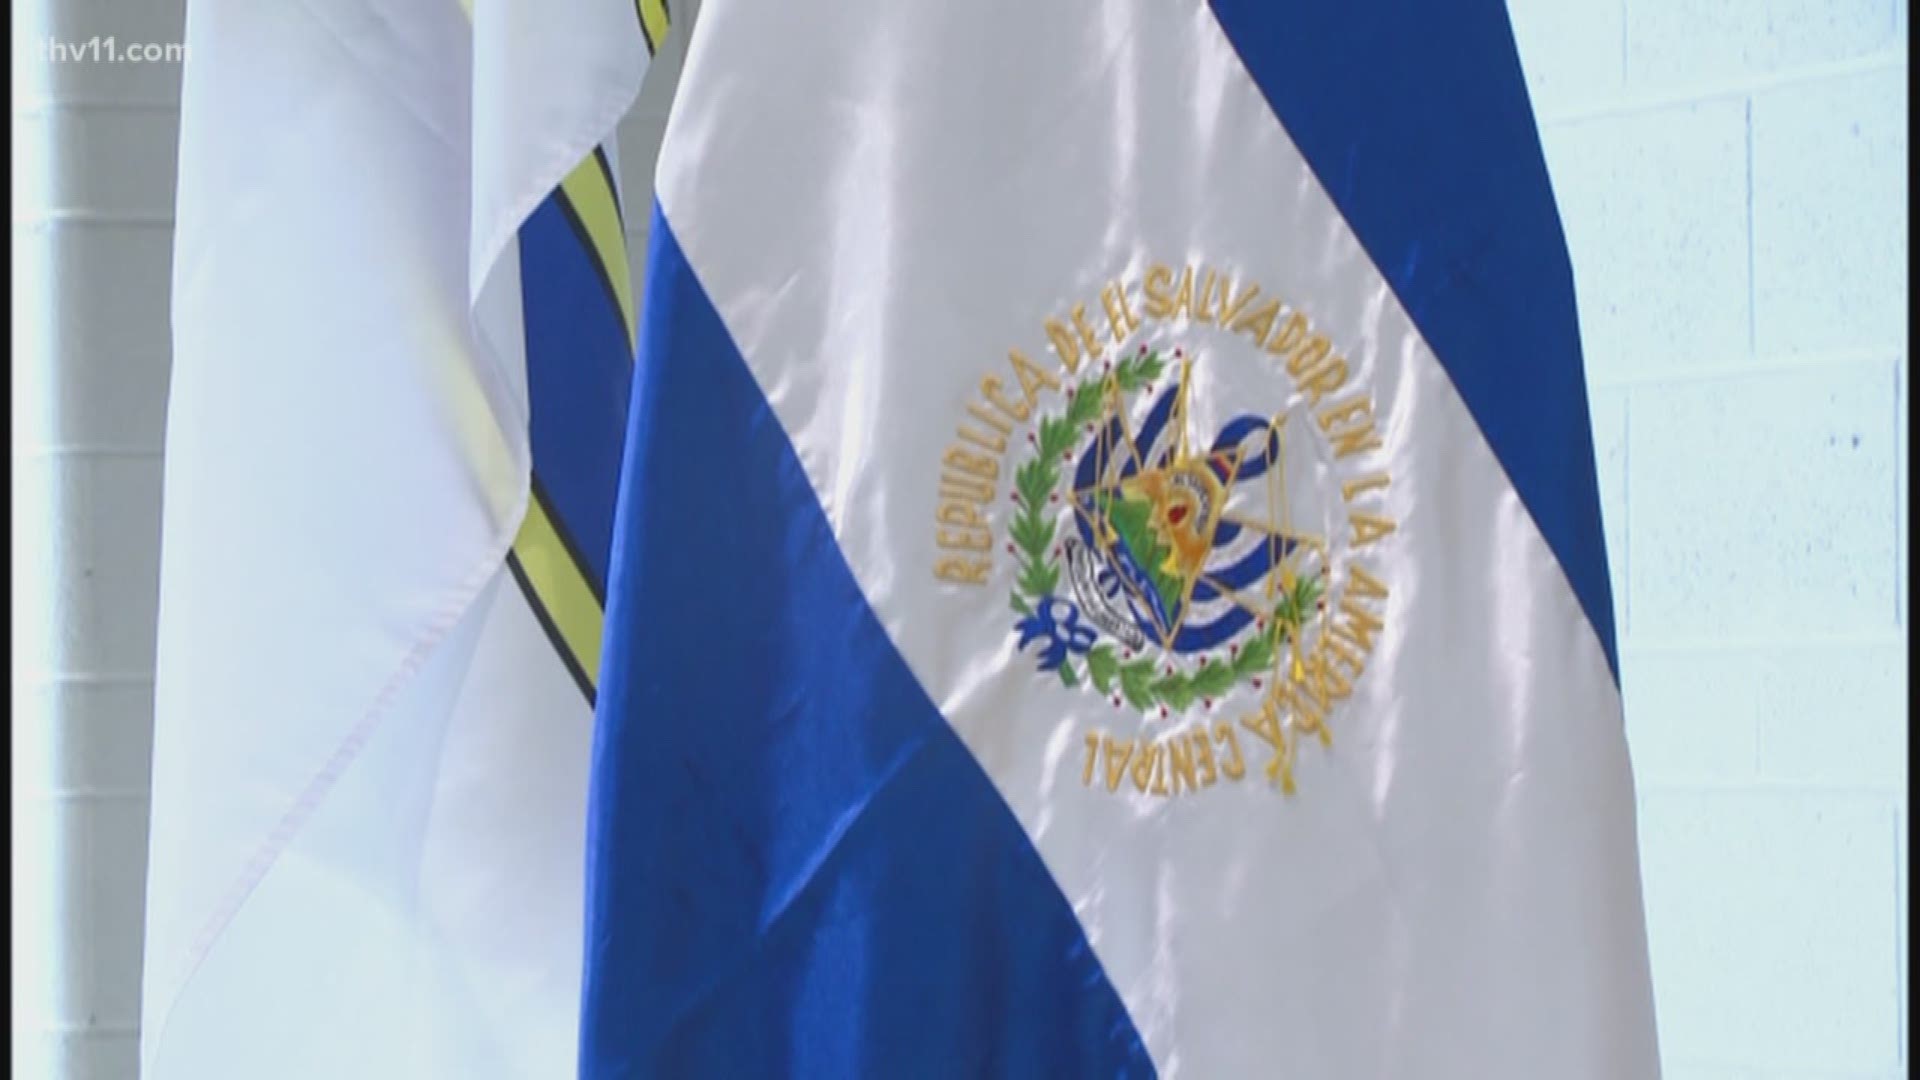 The city of Little Rock is offering the city's El Salvadoran community much-needed services in hopes of giving them the tools they need.